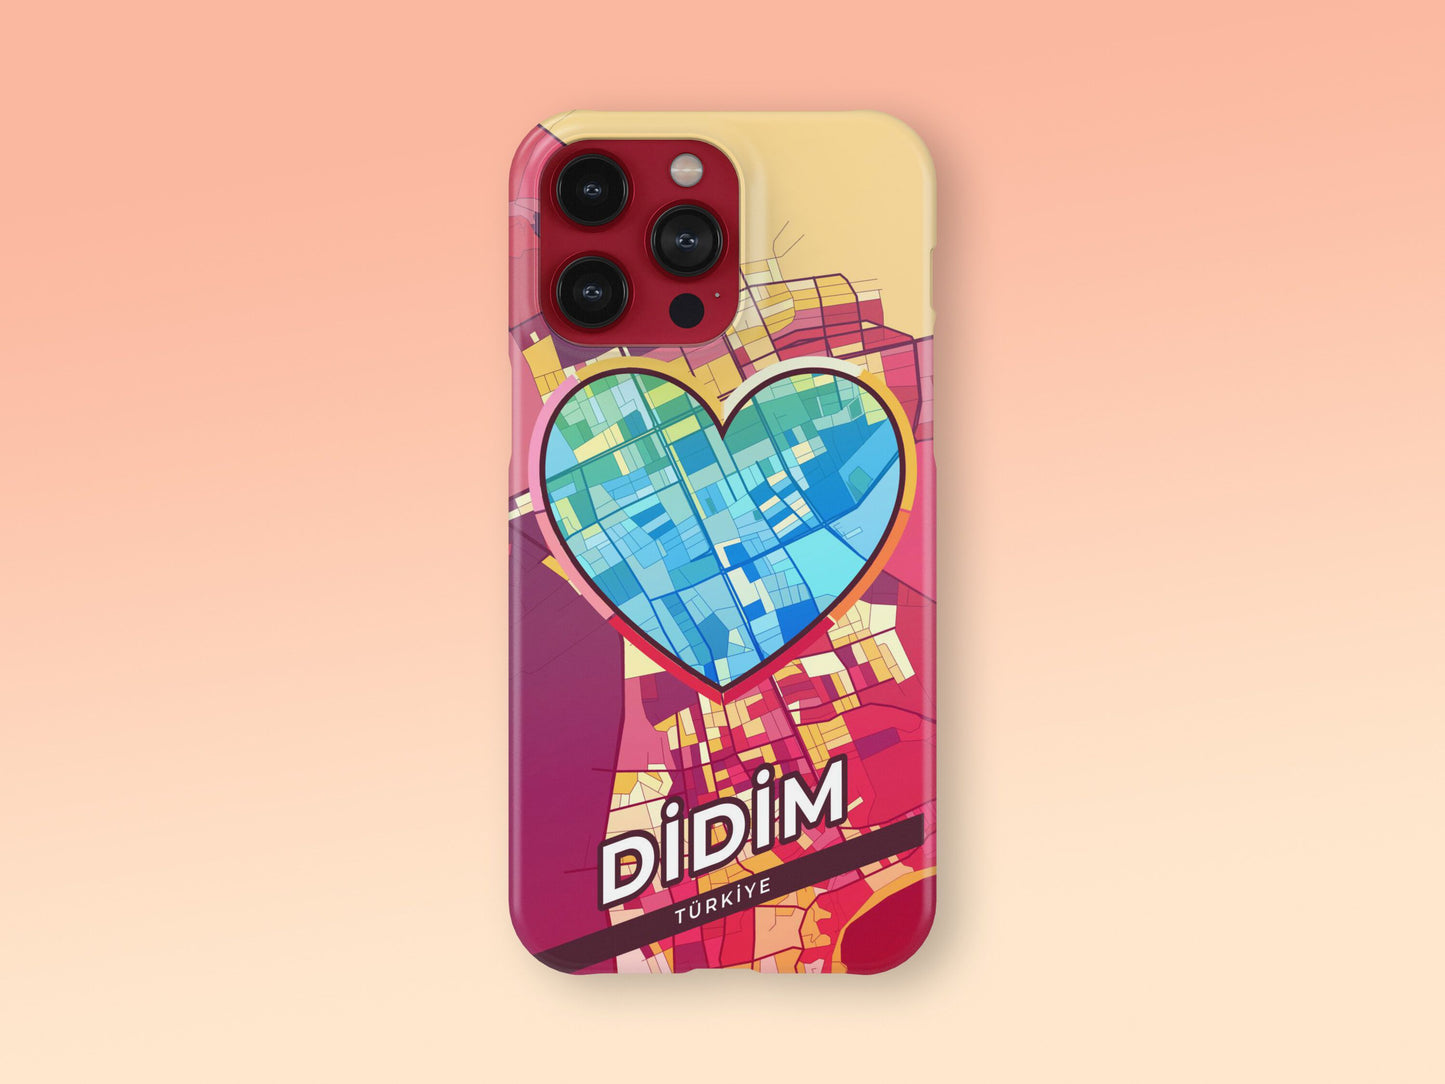 Didim Turkey slim phone case with colorful icon. Birthday, wedding or housewarming gift. Couple match cases. 2